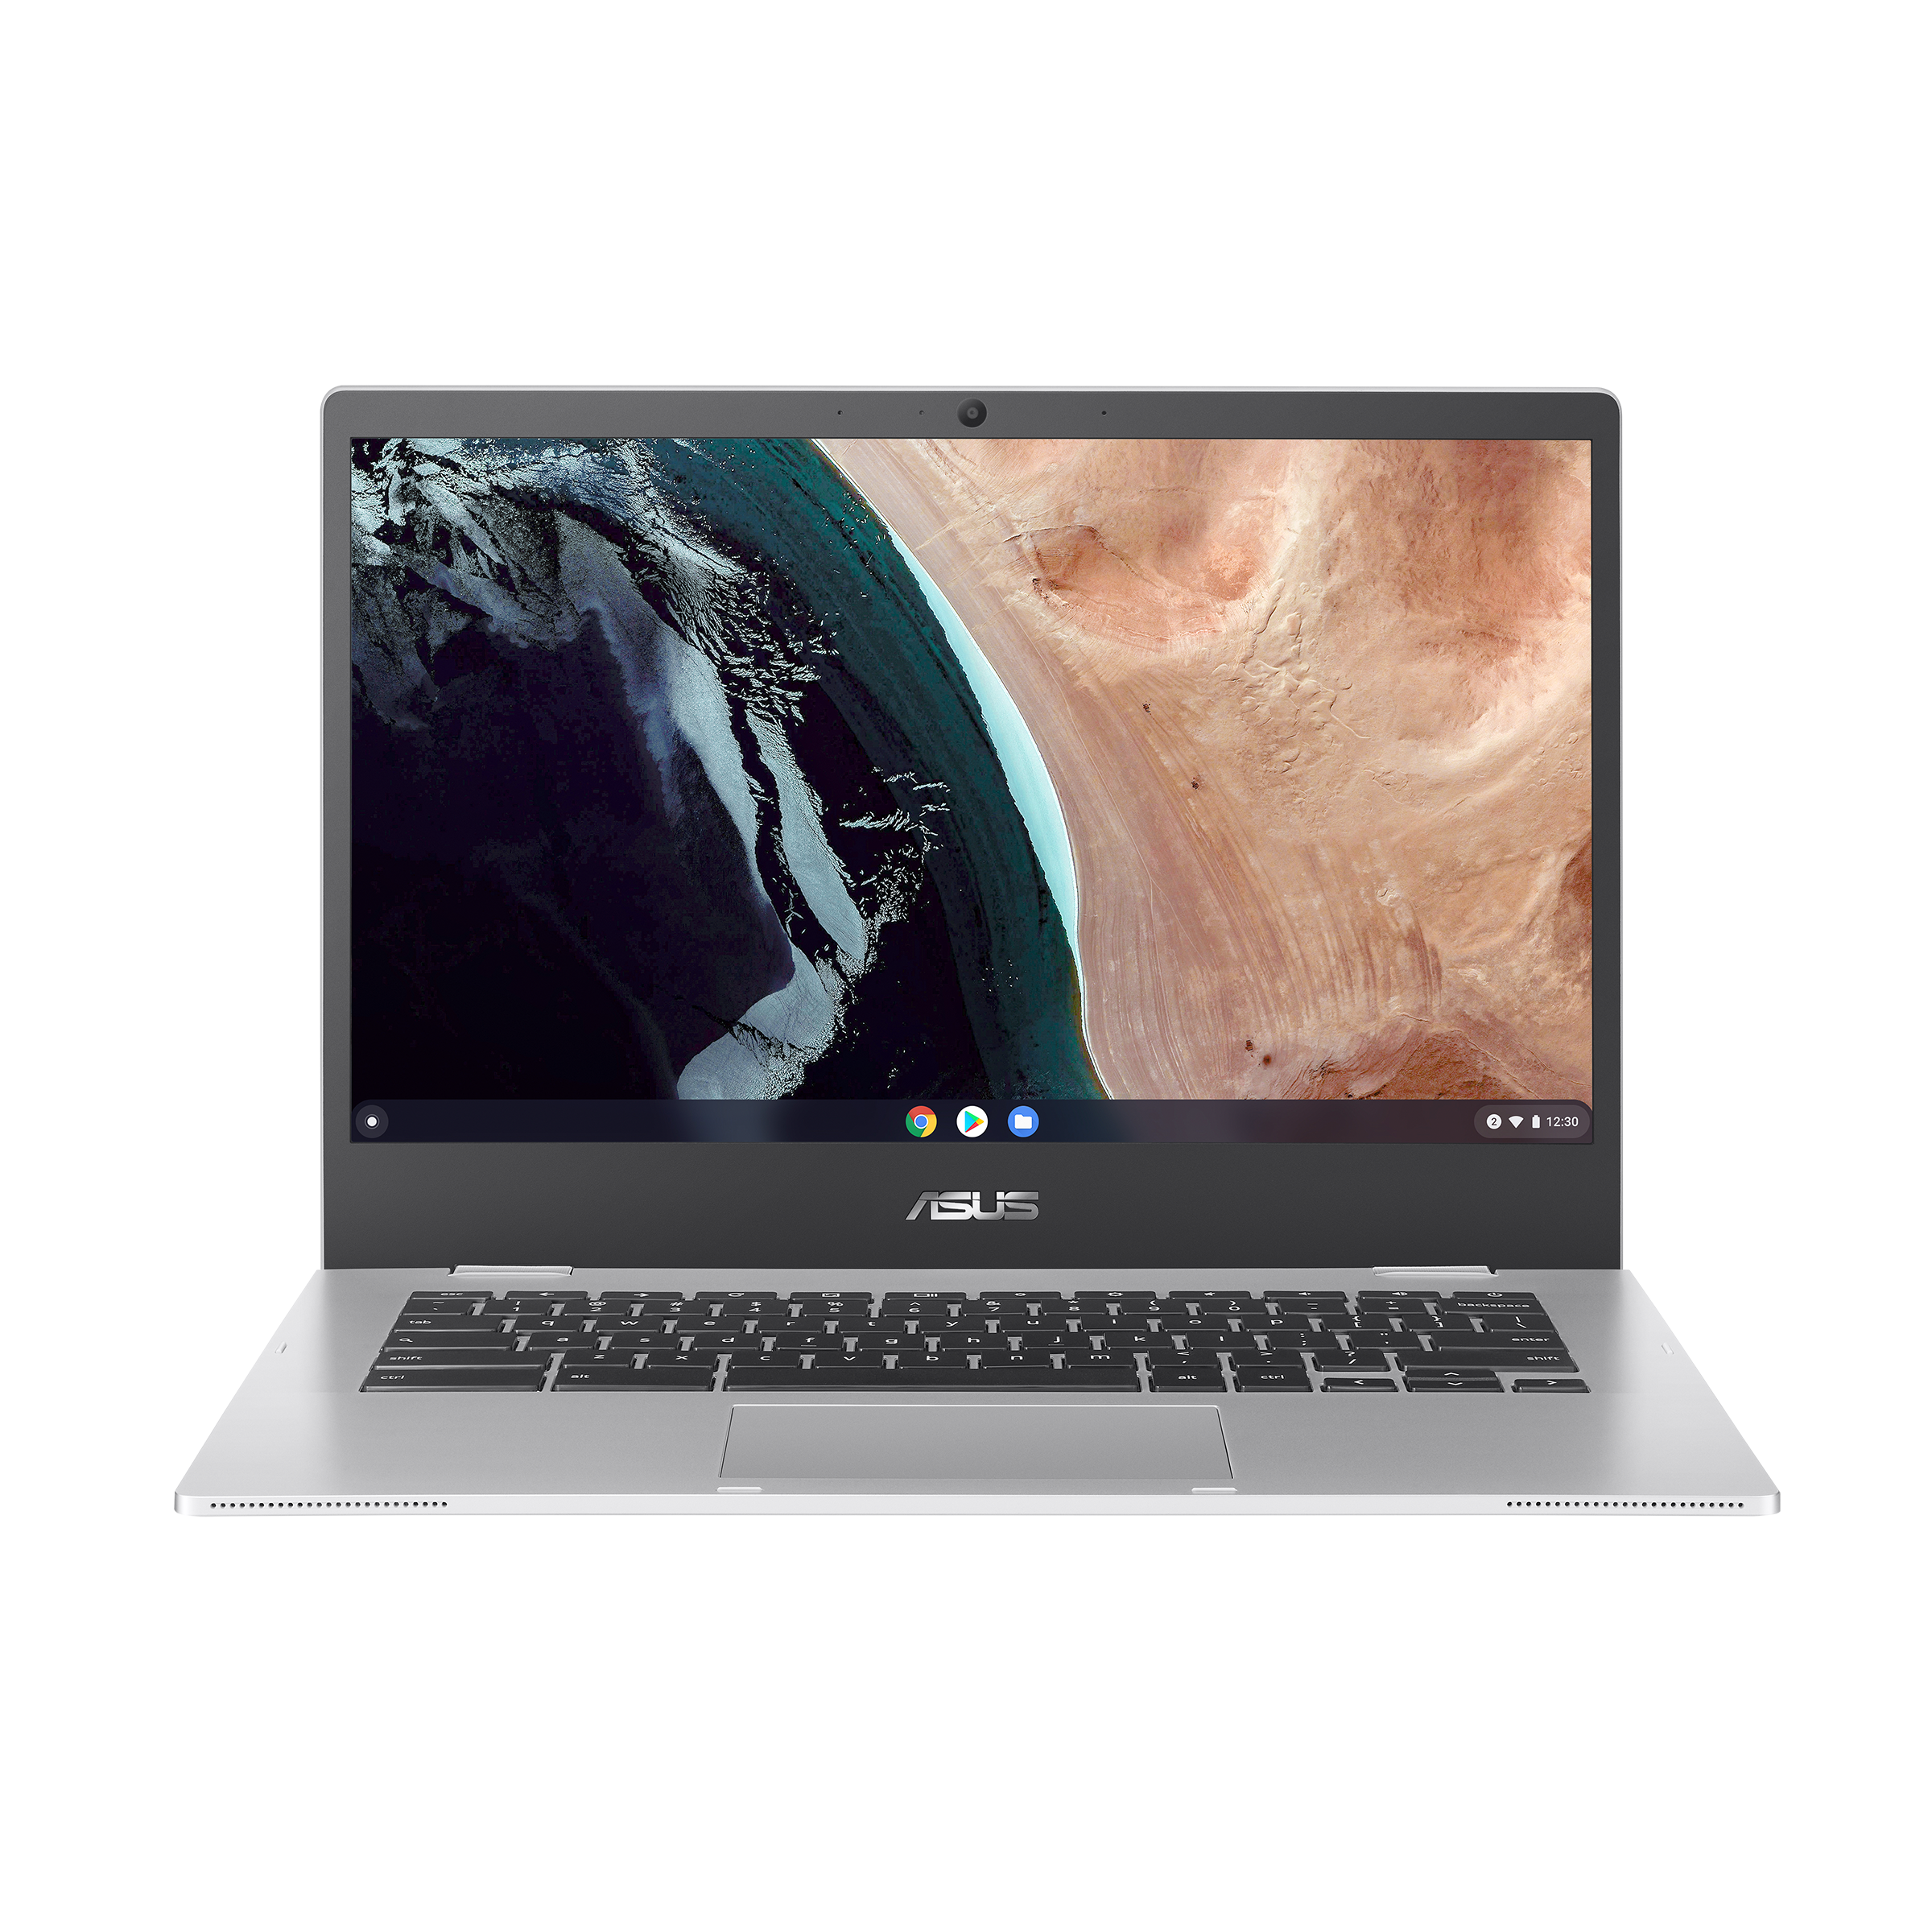 ASUS Chromebook CX1 (CX1400)｜Laptops For Home｜ASUS Global